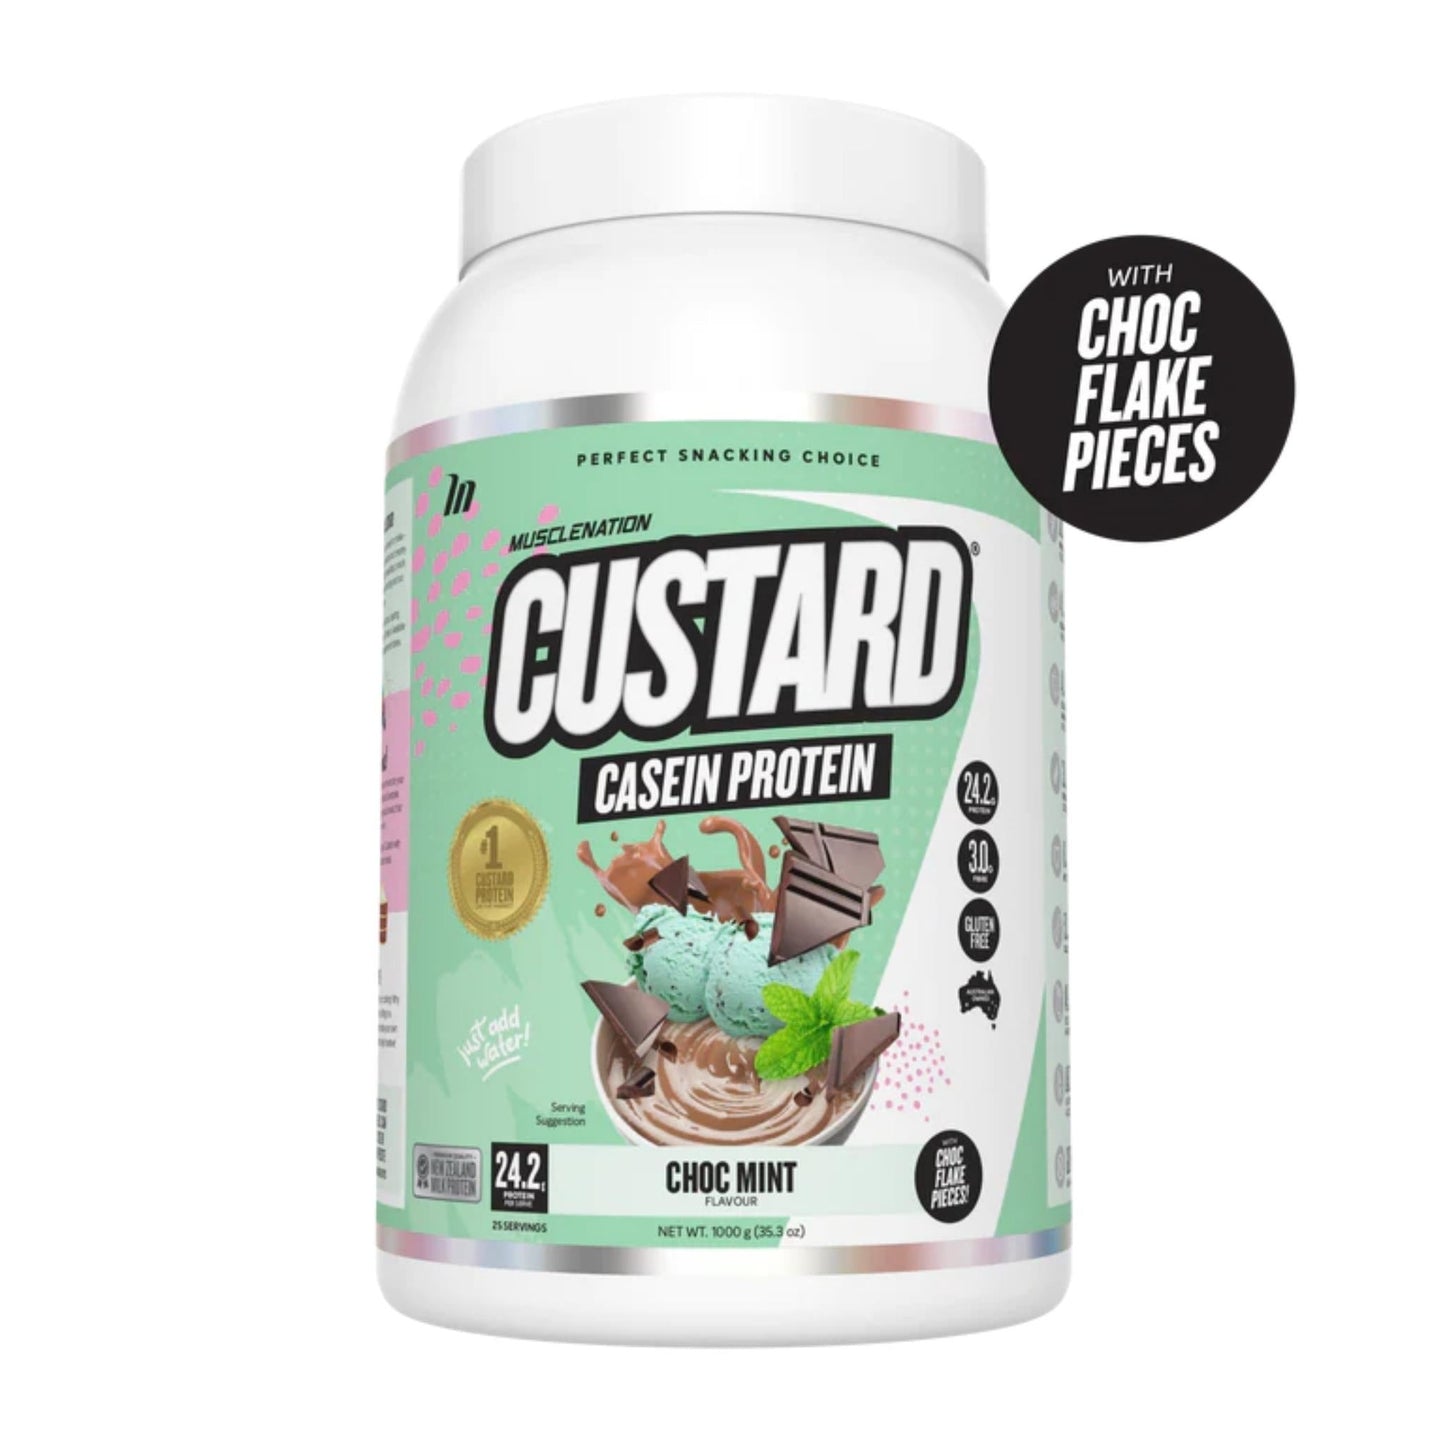 Muscle Nation - Custard Casein Protein - Supplements - Chocolate Mint - The Cave Gym